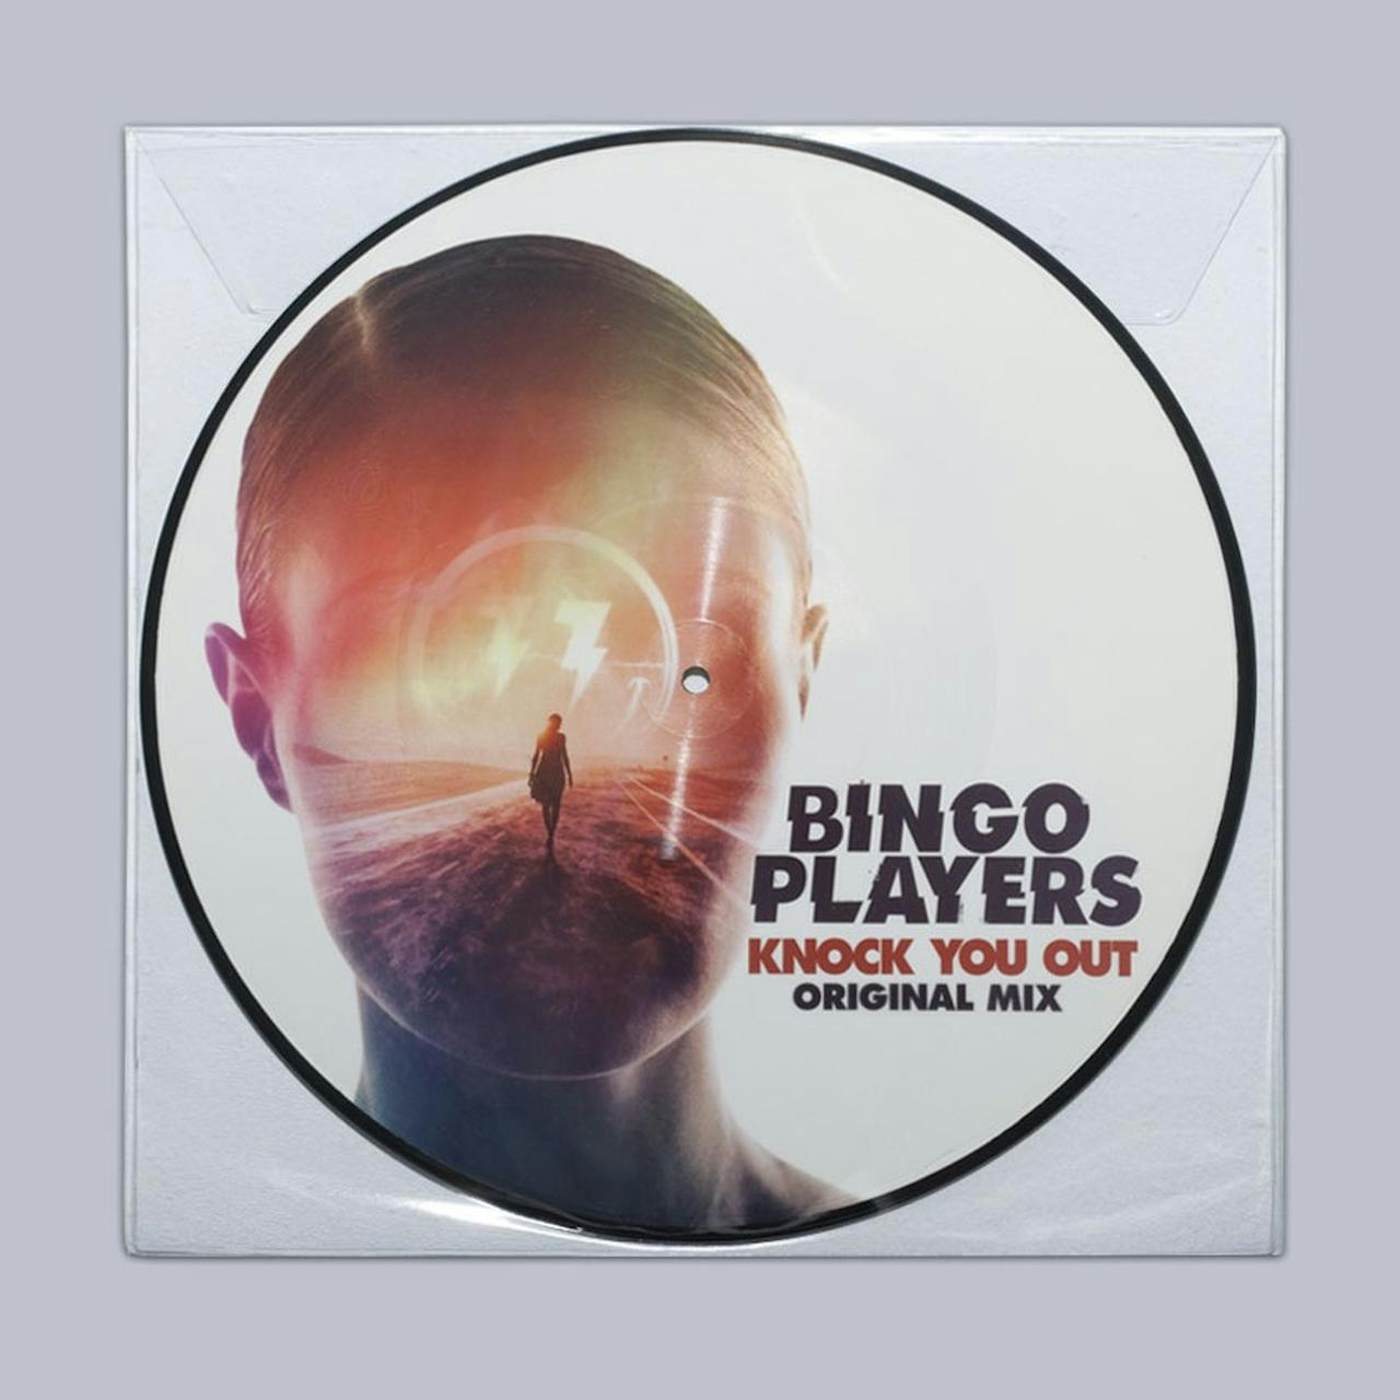 Bingo Players "Knock You Out" Picture Disc Vinyl